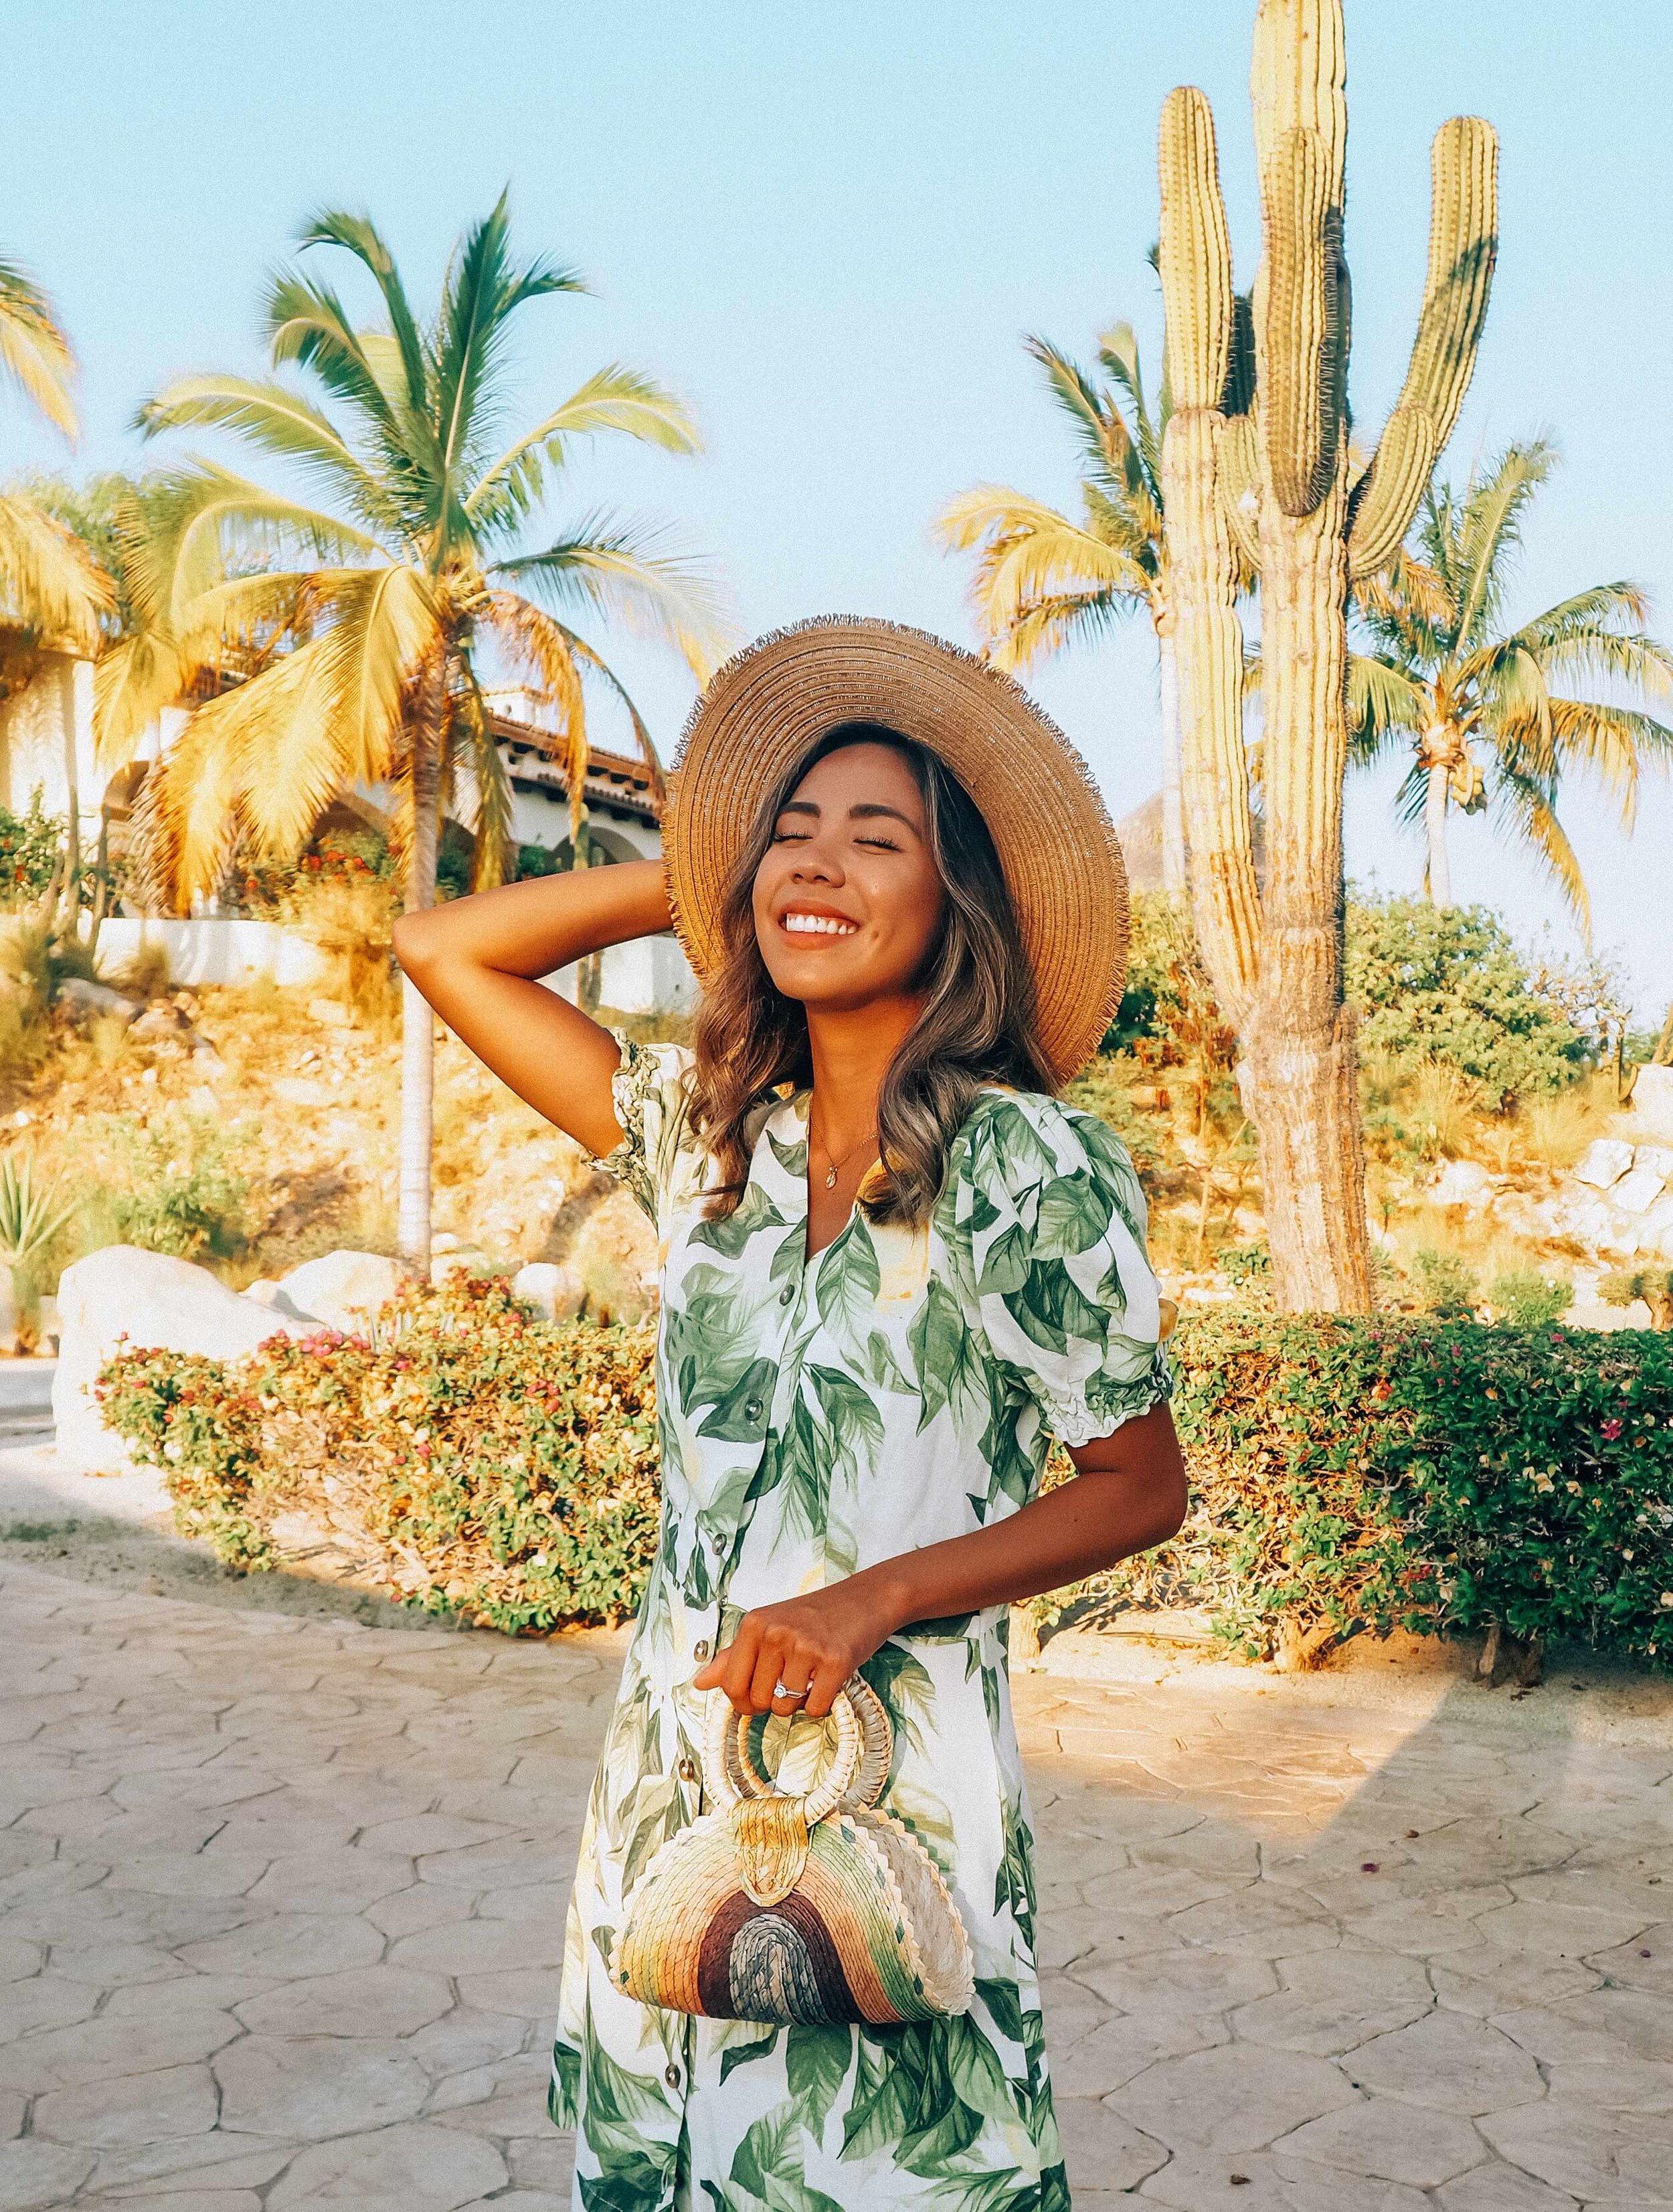 6 Easy Ready To Go Vacation Outfits For Mexico When She Roams